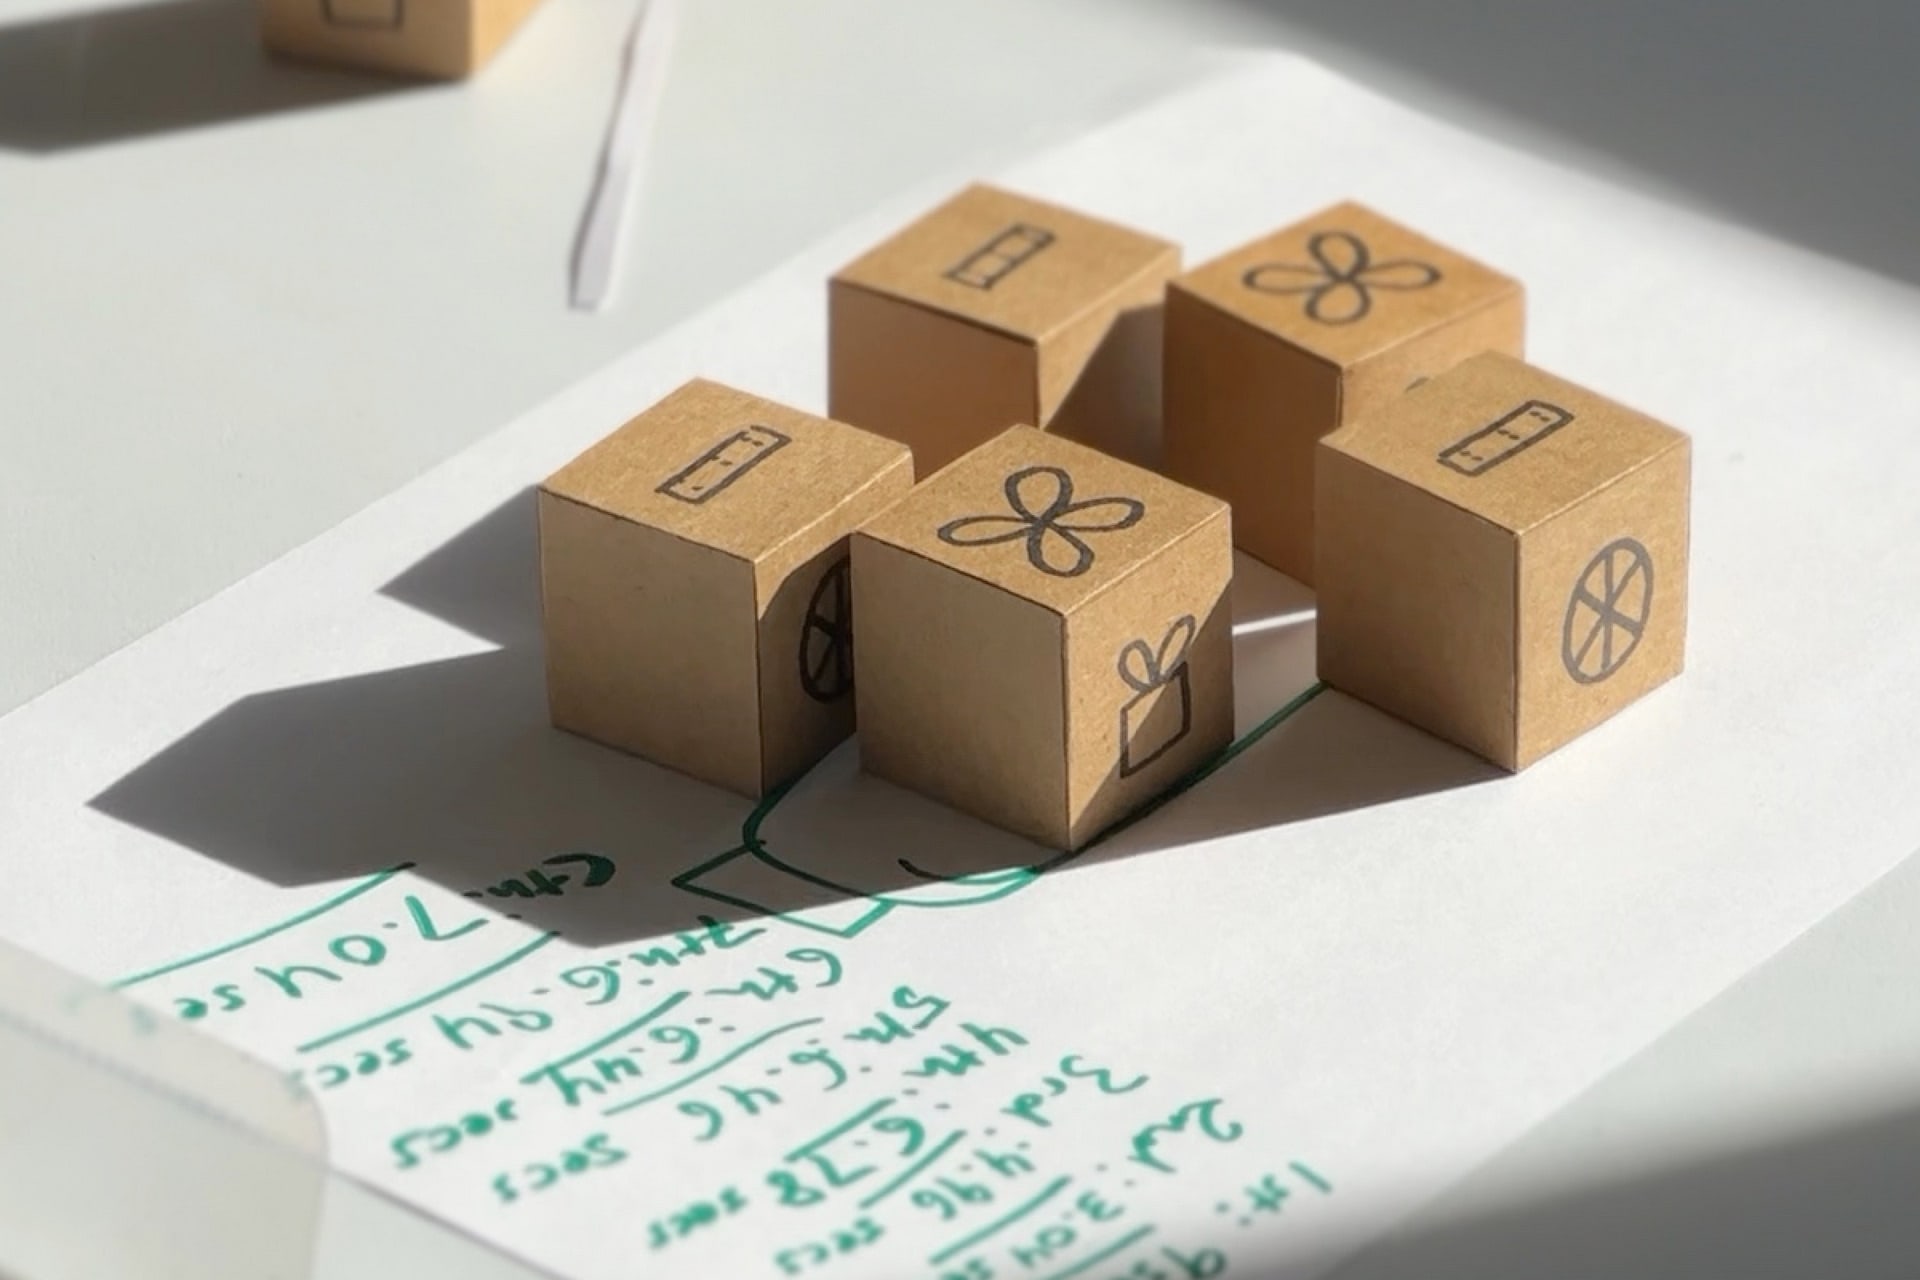 5 paper cubes on a pieces of paper, with a list of times written down from iterations